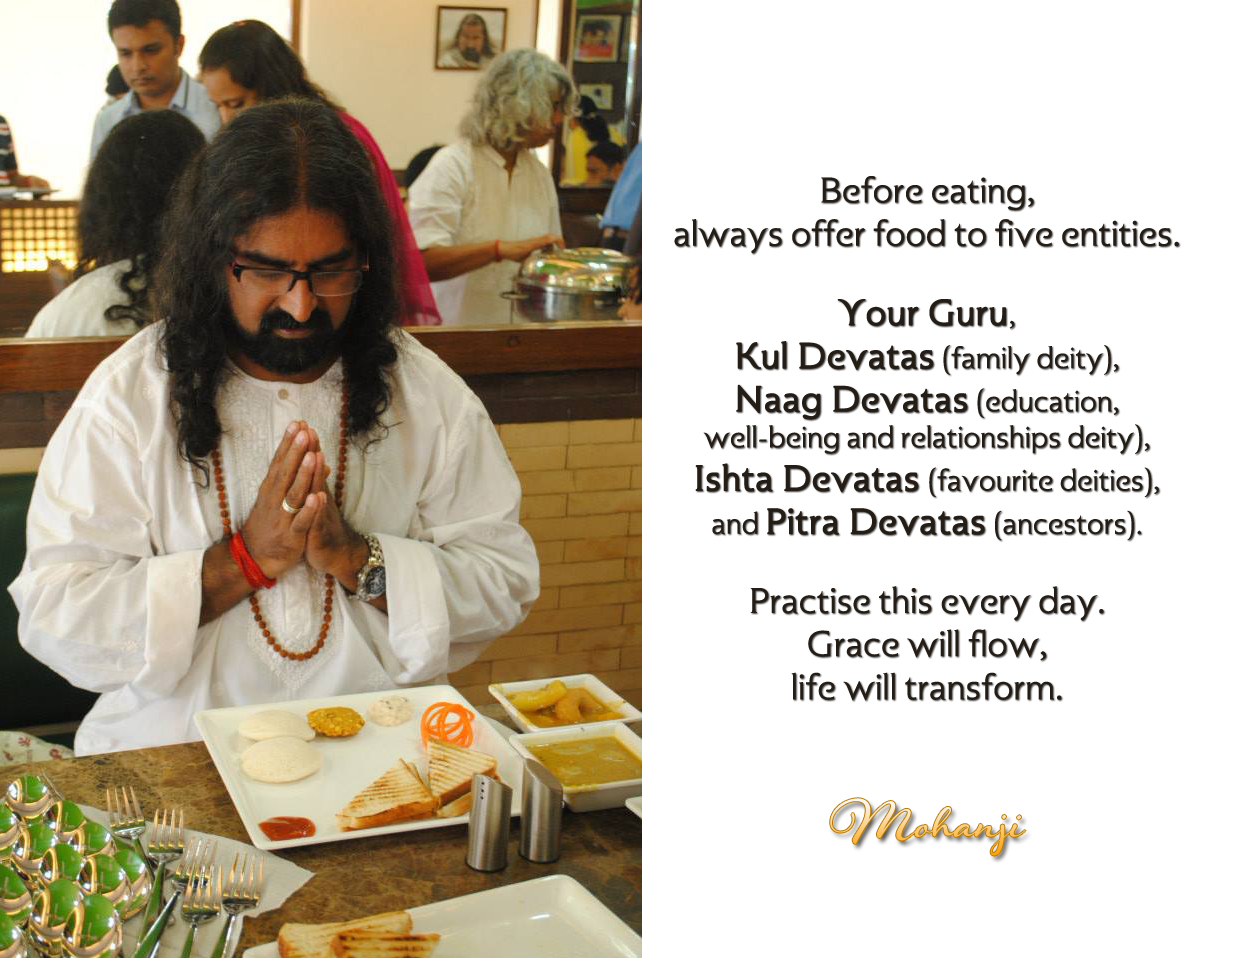 Before eating, always offer food to five entities.
Your Guru,
Kul Devatas (family deity),
Naag Devatas (education, well-being, and relationships deities),
and Pitra Devatas (ancestors).

Practise this everyday.
Grace will flow, life will transform.
-Mohanji
